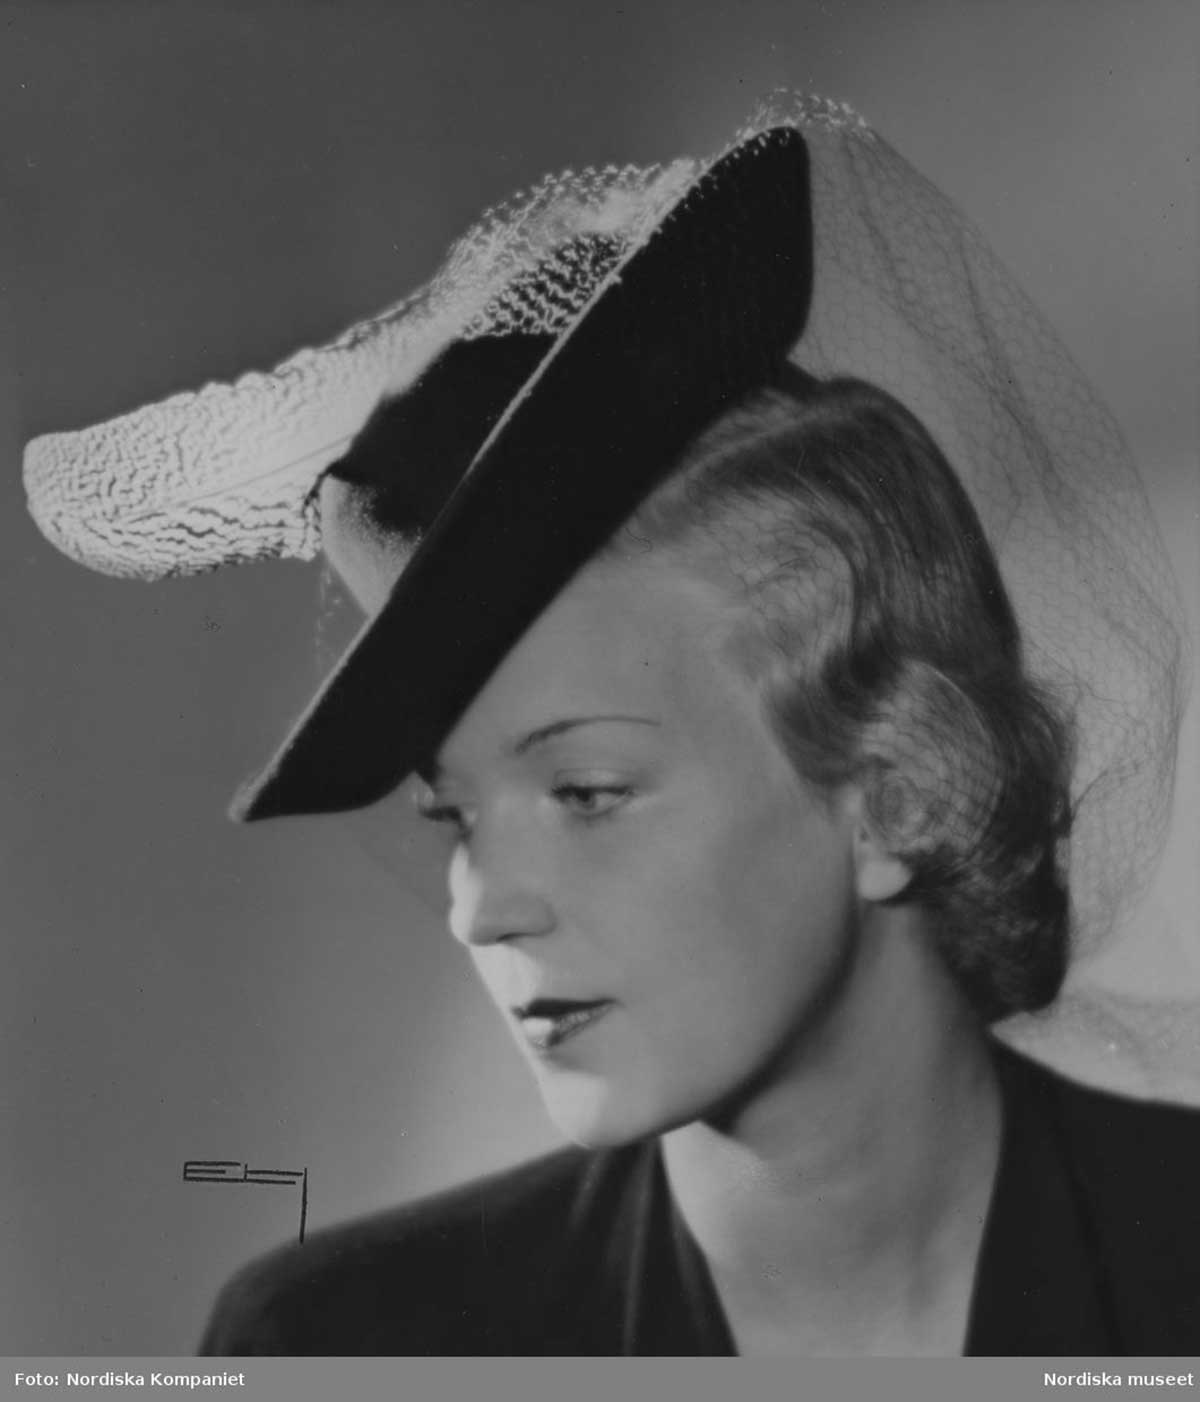 1942 Mexican Sombrero hat and veil